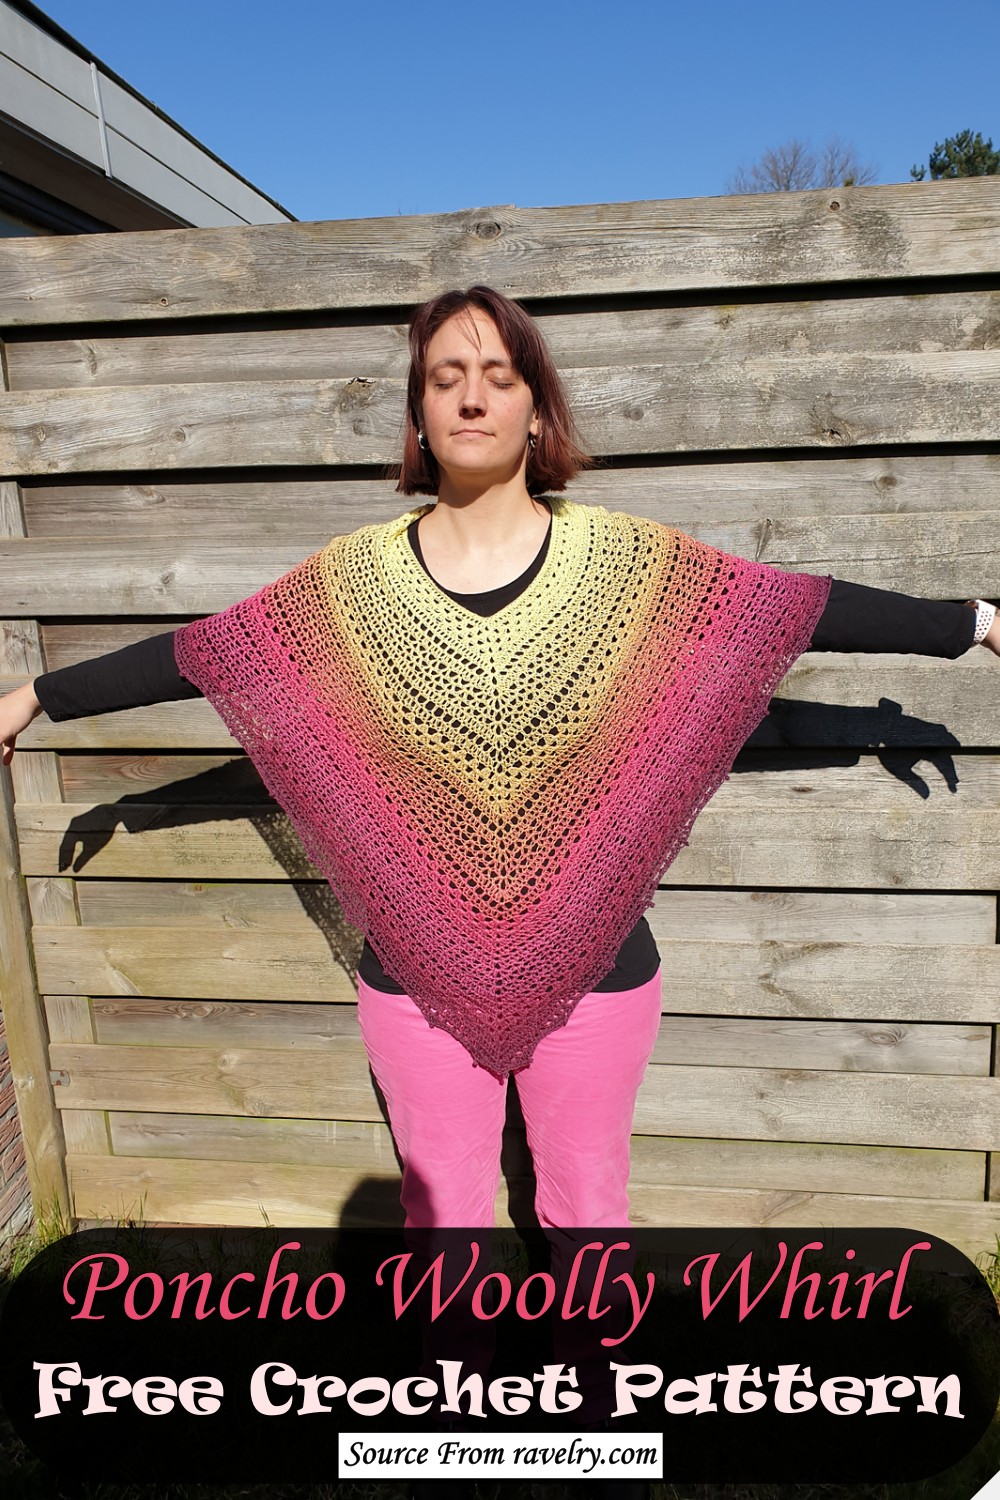 Poncho Woolly Whirl